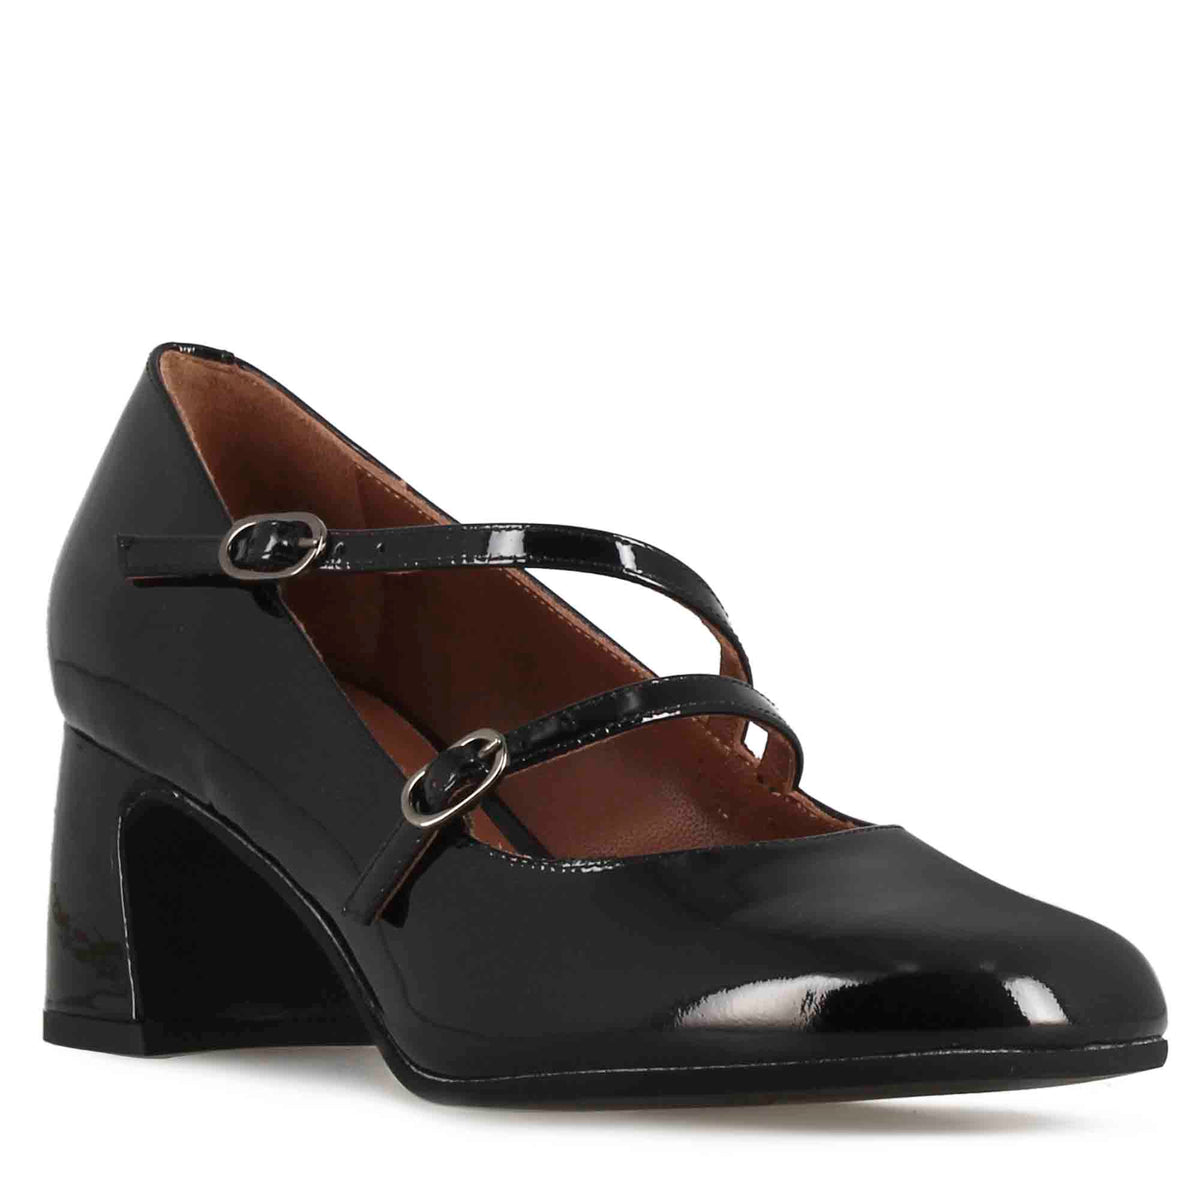 Mary Jane décolleté in black patent leather with double strap